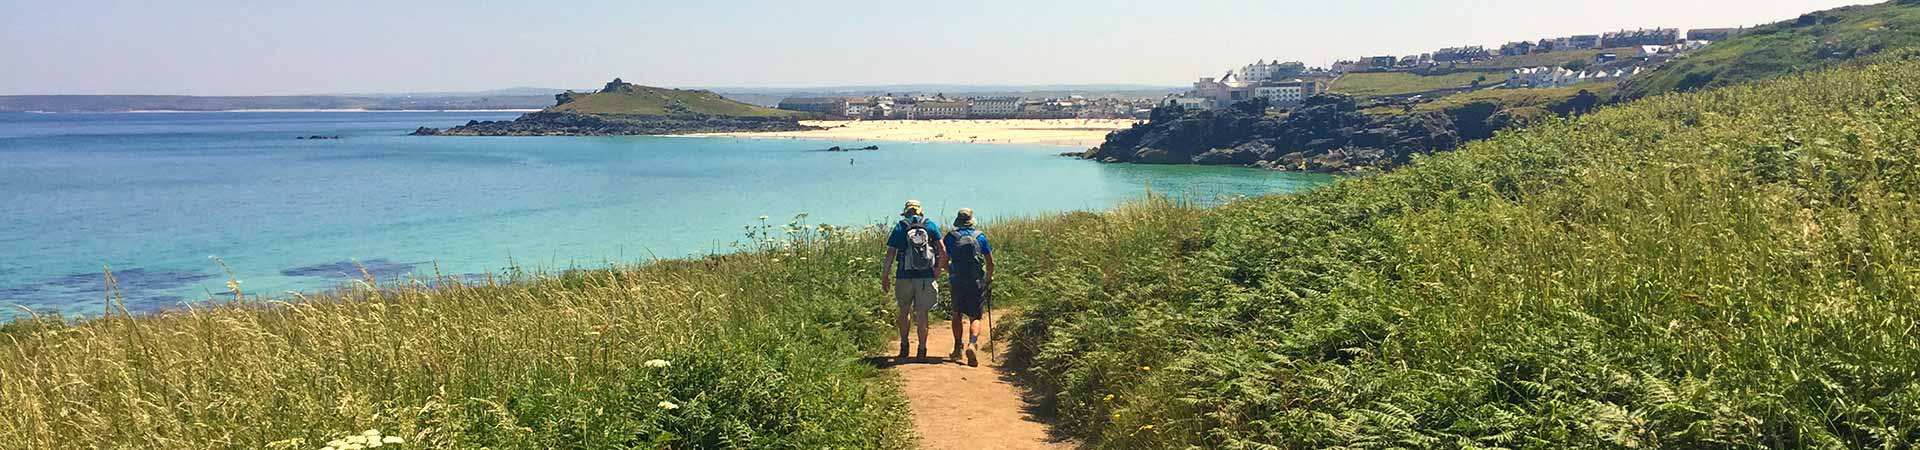 Zennor to St Ives Walk